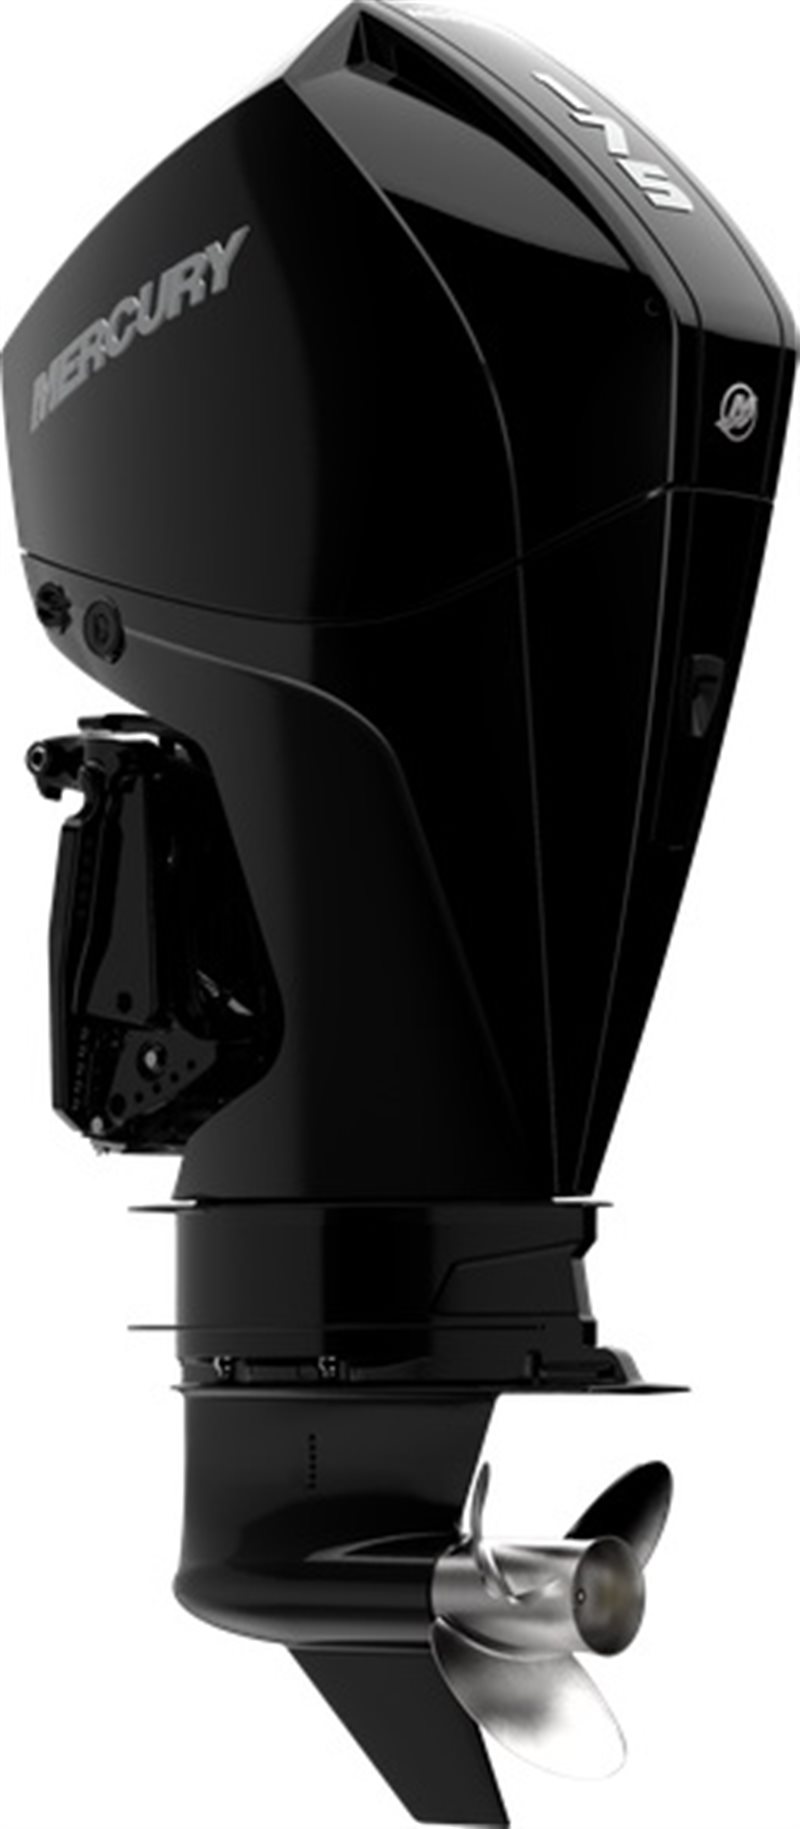 2021 Mercury Outboard Fourstroke 175 - 300 225 HP at DT Powersports & Marine